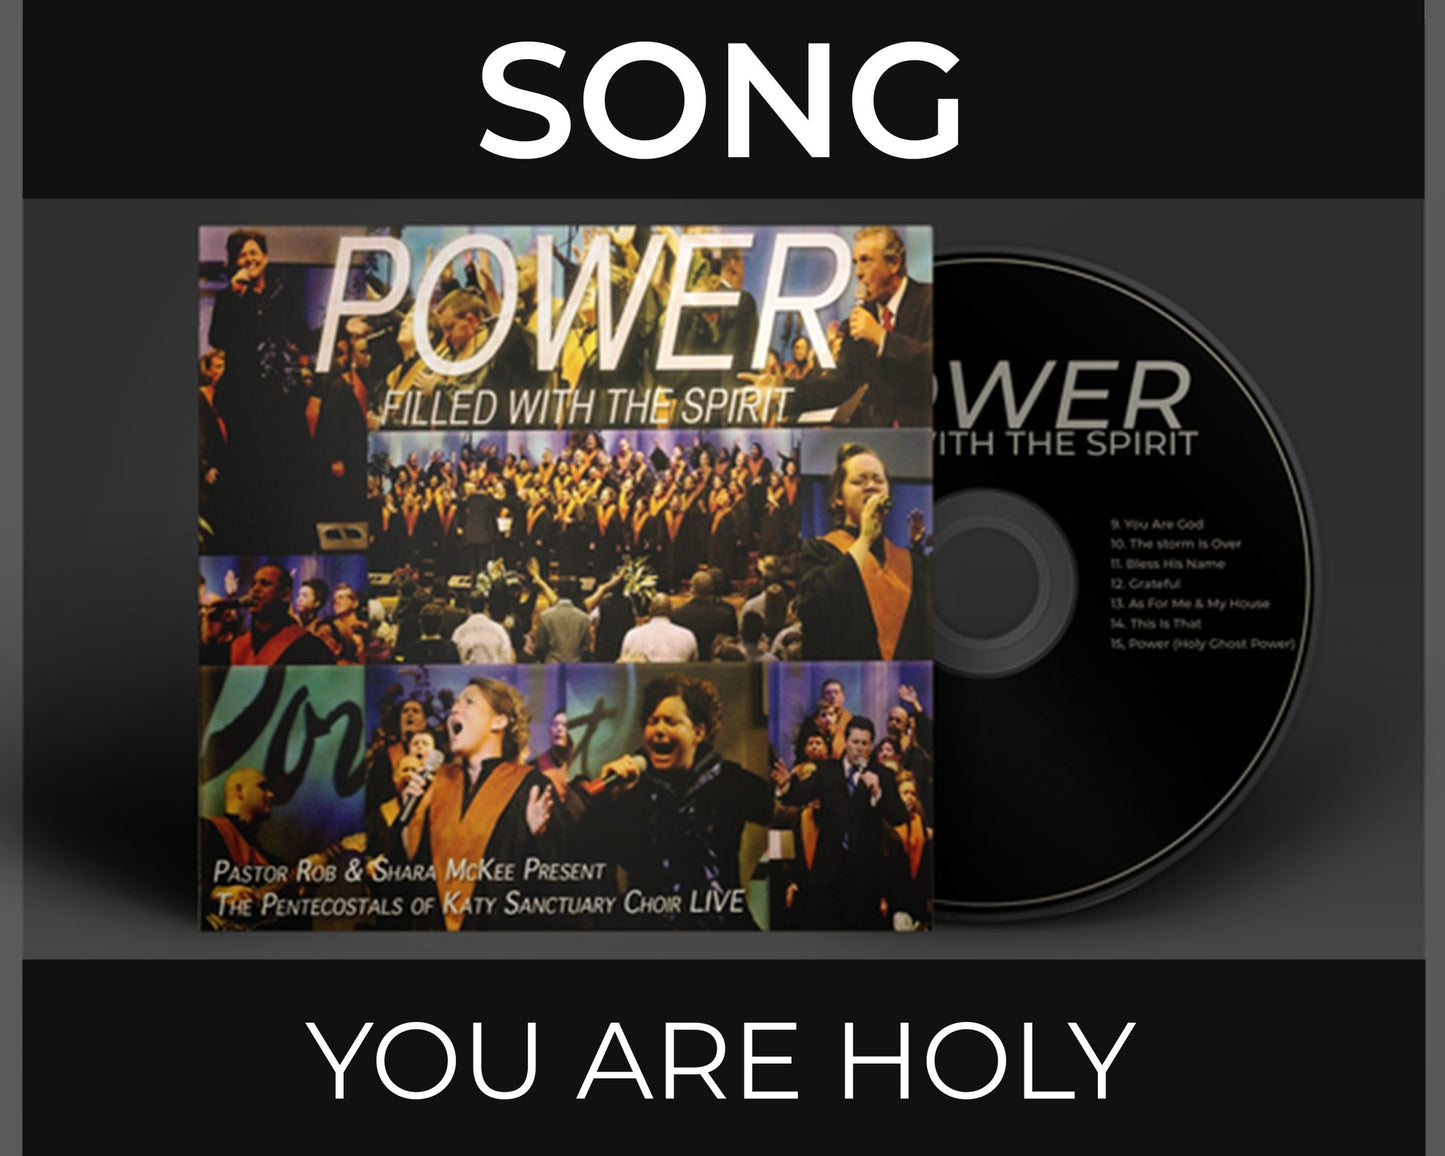 You Are Holy - The POK Store